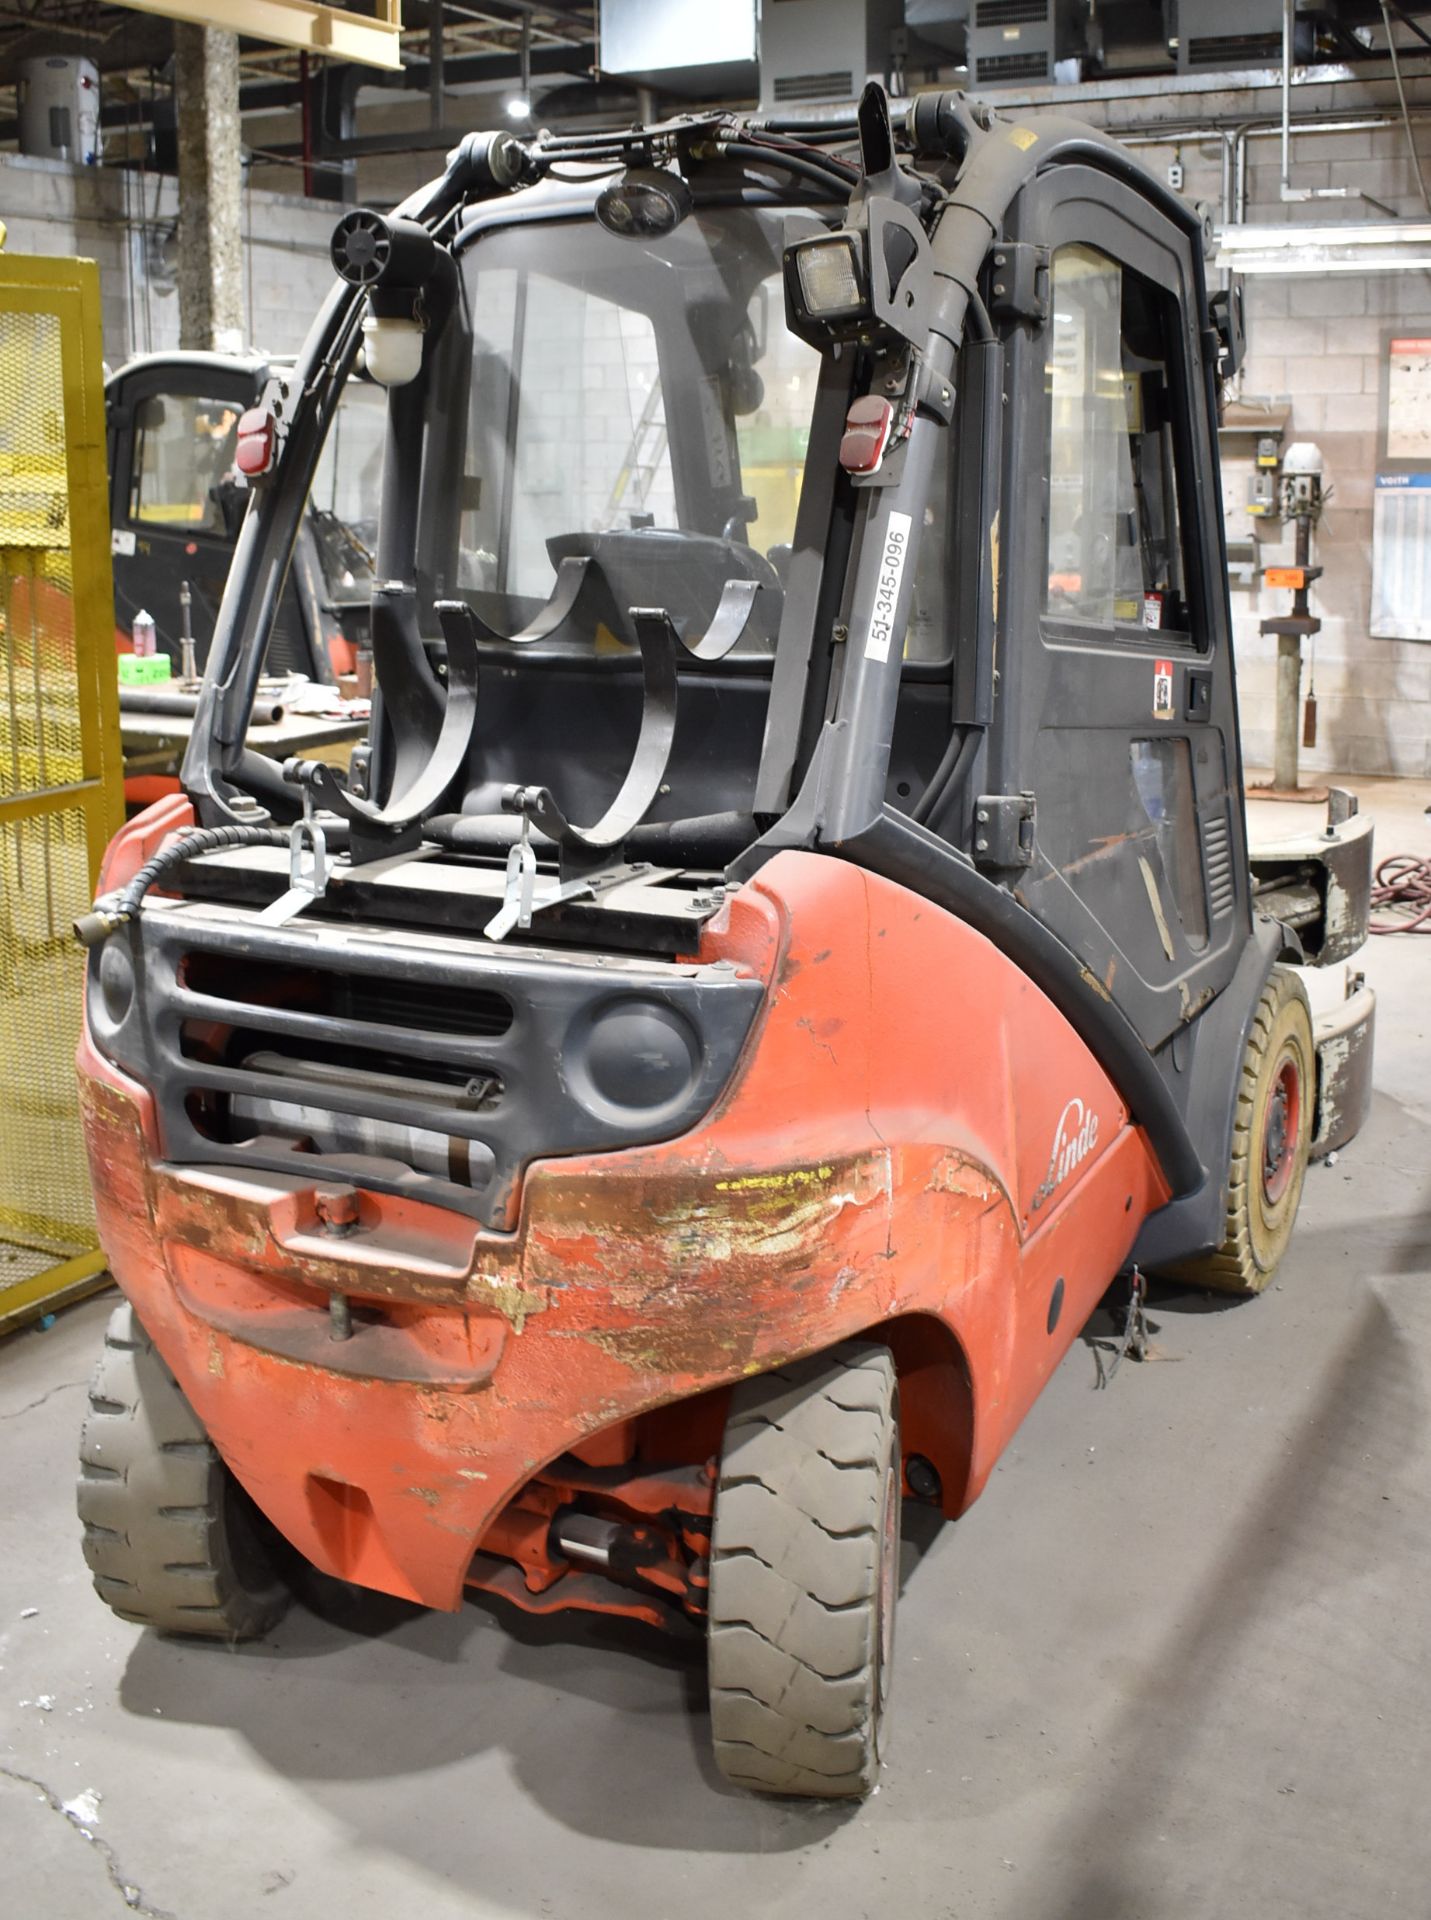 LINDE (2005) H25T 3,410 LB. CAPACITY LPG FORKLIFT WITH 183.5" MAX. LIFT HEIGHT, 2-STAGE MAST, - Image 6 of 17